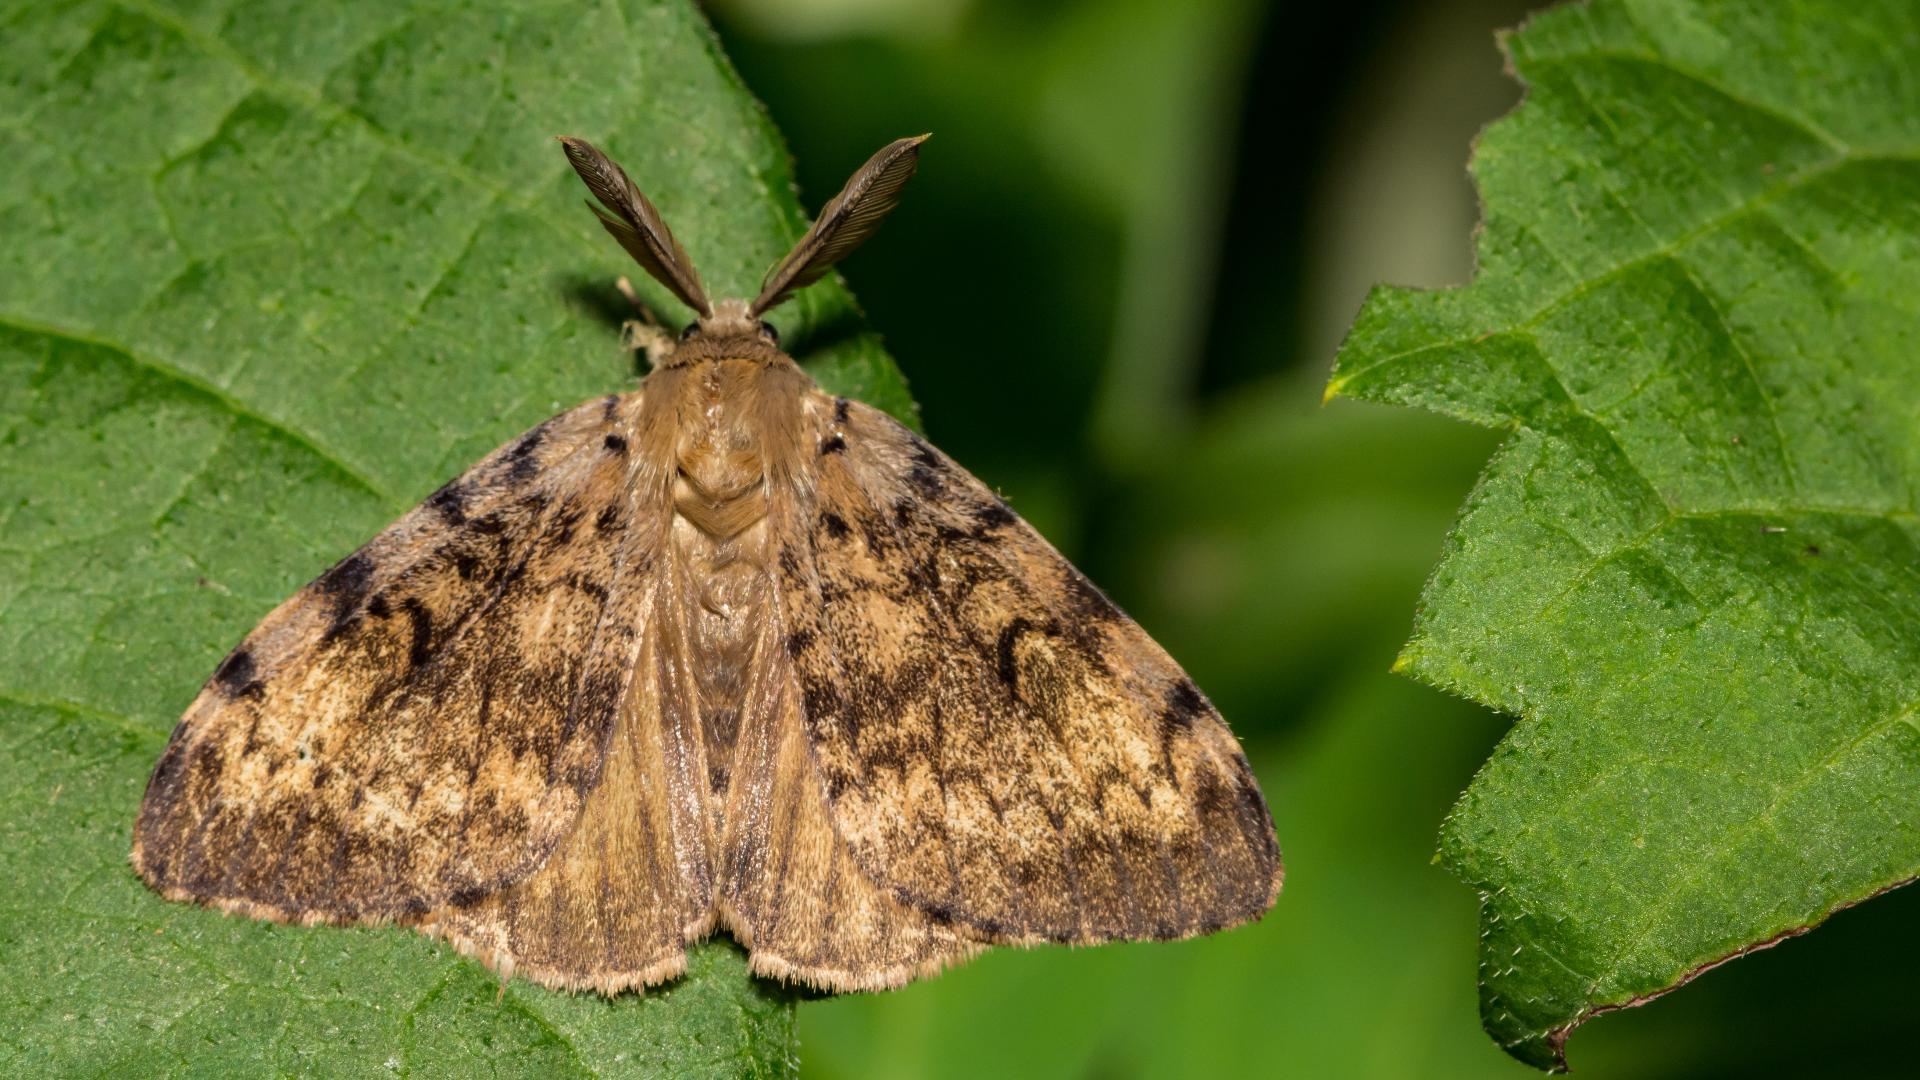 Spongy moths can defoliate an entire forest if the population is left unchecked.